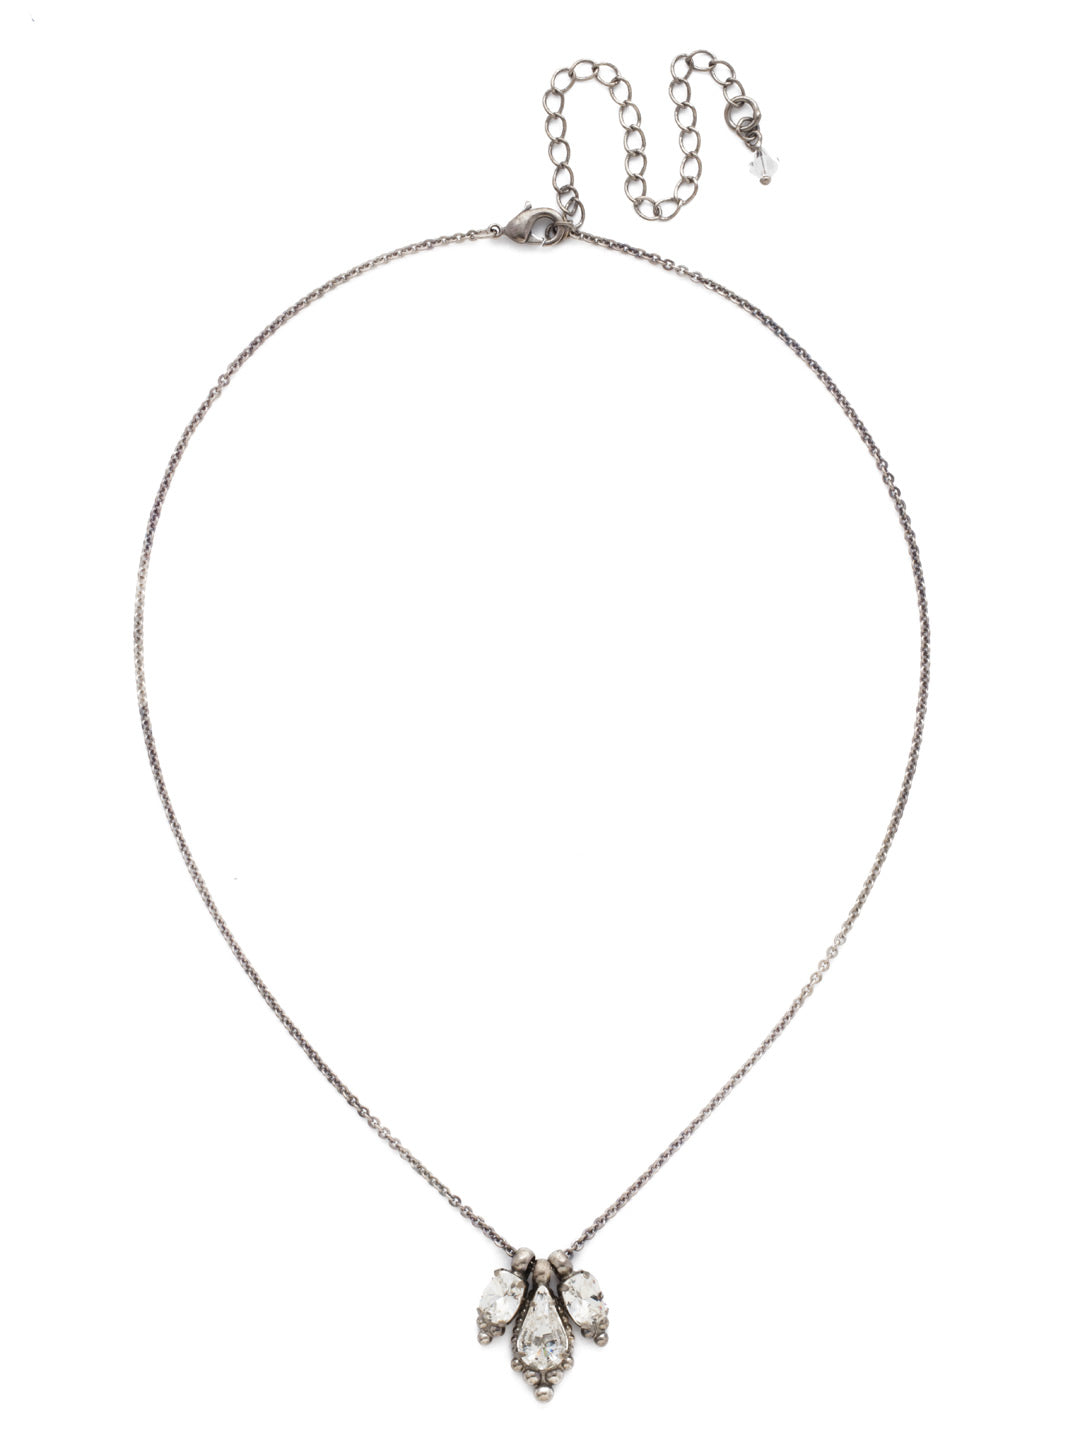 Embroidered Trifecta Pendant Pendant Necklace - NDH22ASCRY - <p>Our Embroidered Trifecta Pendant instantly adds sparkle to any outfit. Three gemstones adorn a delicate chain for elegant glamour. Wear alone or layer with longer pieces for all over sparkle! From Sorrelli's Crystal collection in our Antique Silver-tone finish.</p>